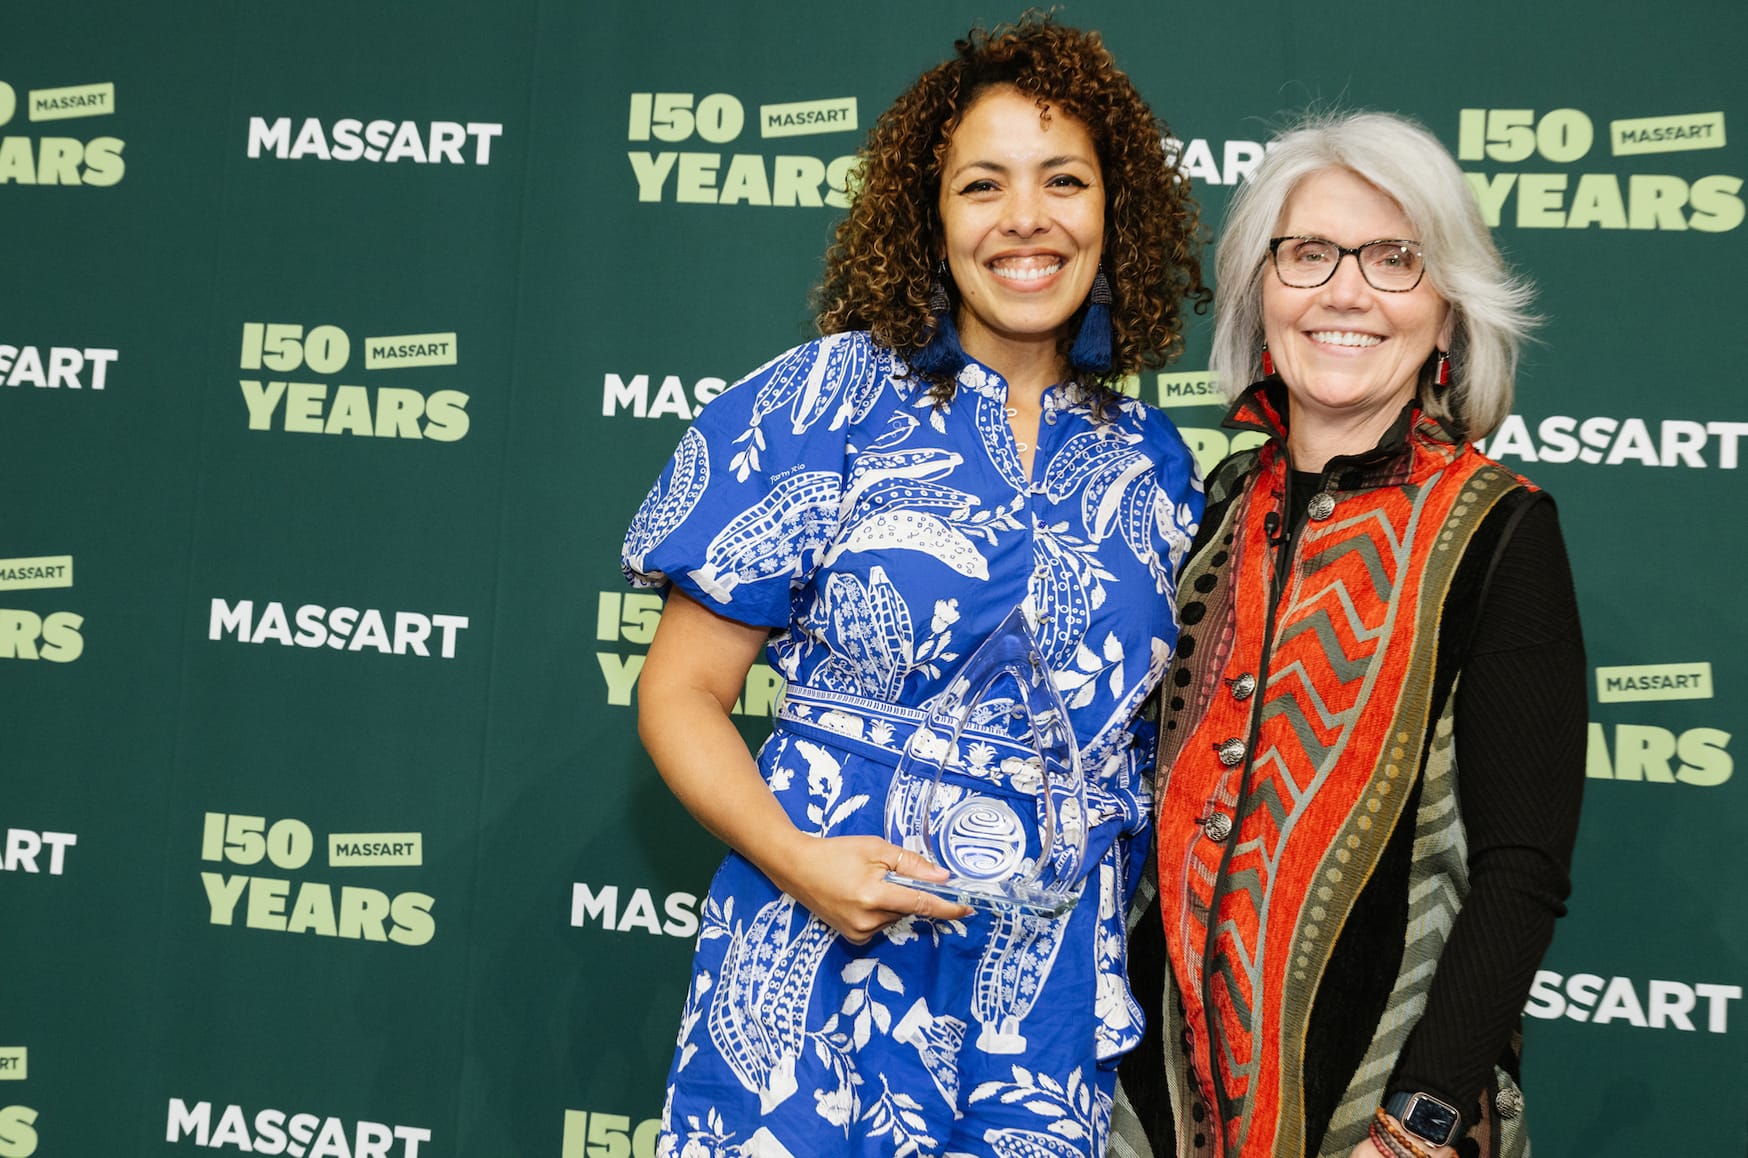 Two women stand smiling with an award in front of a green backdrop that says MassArt 150 years.